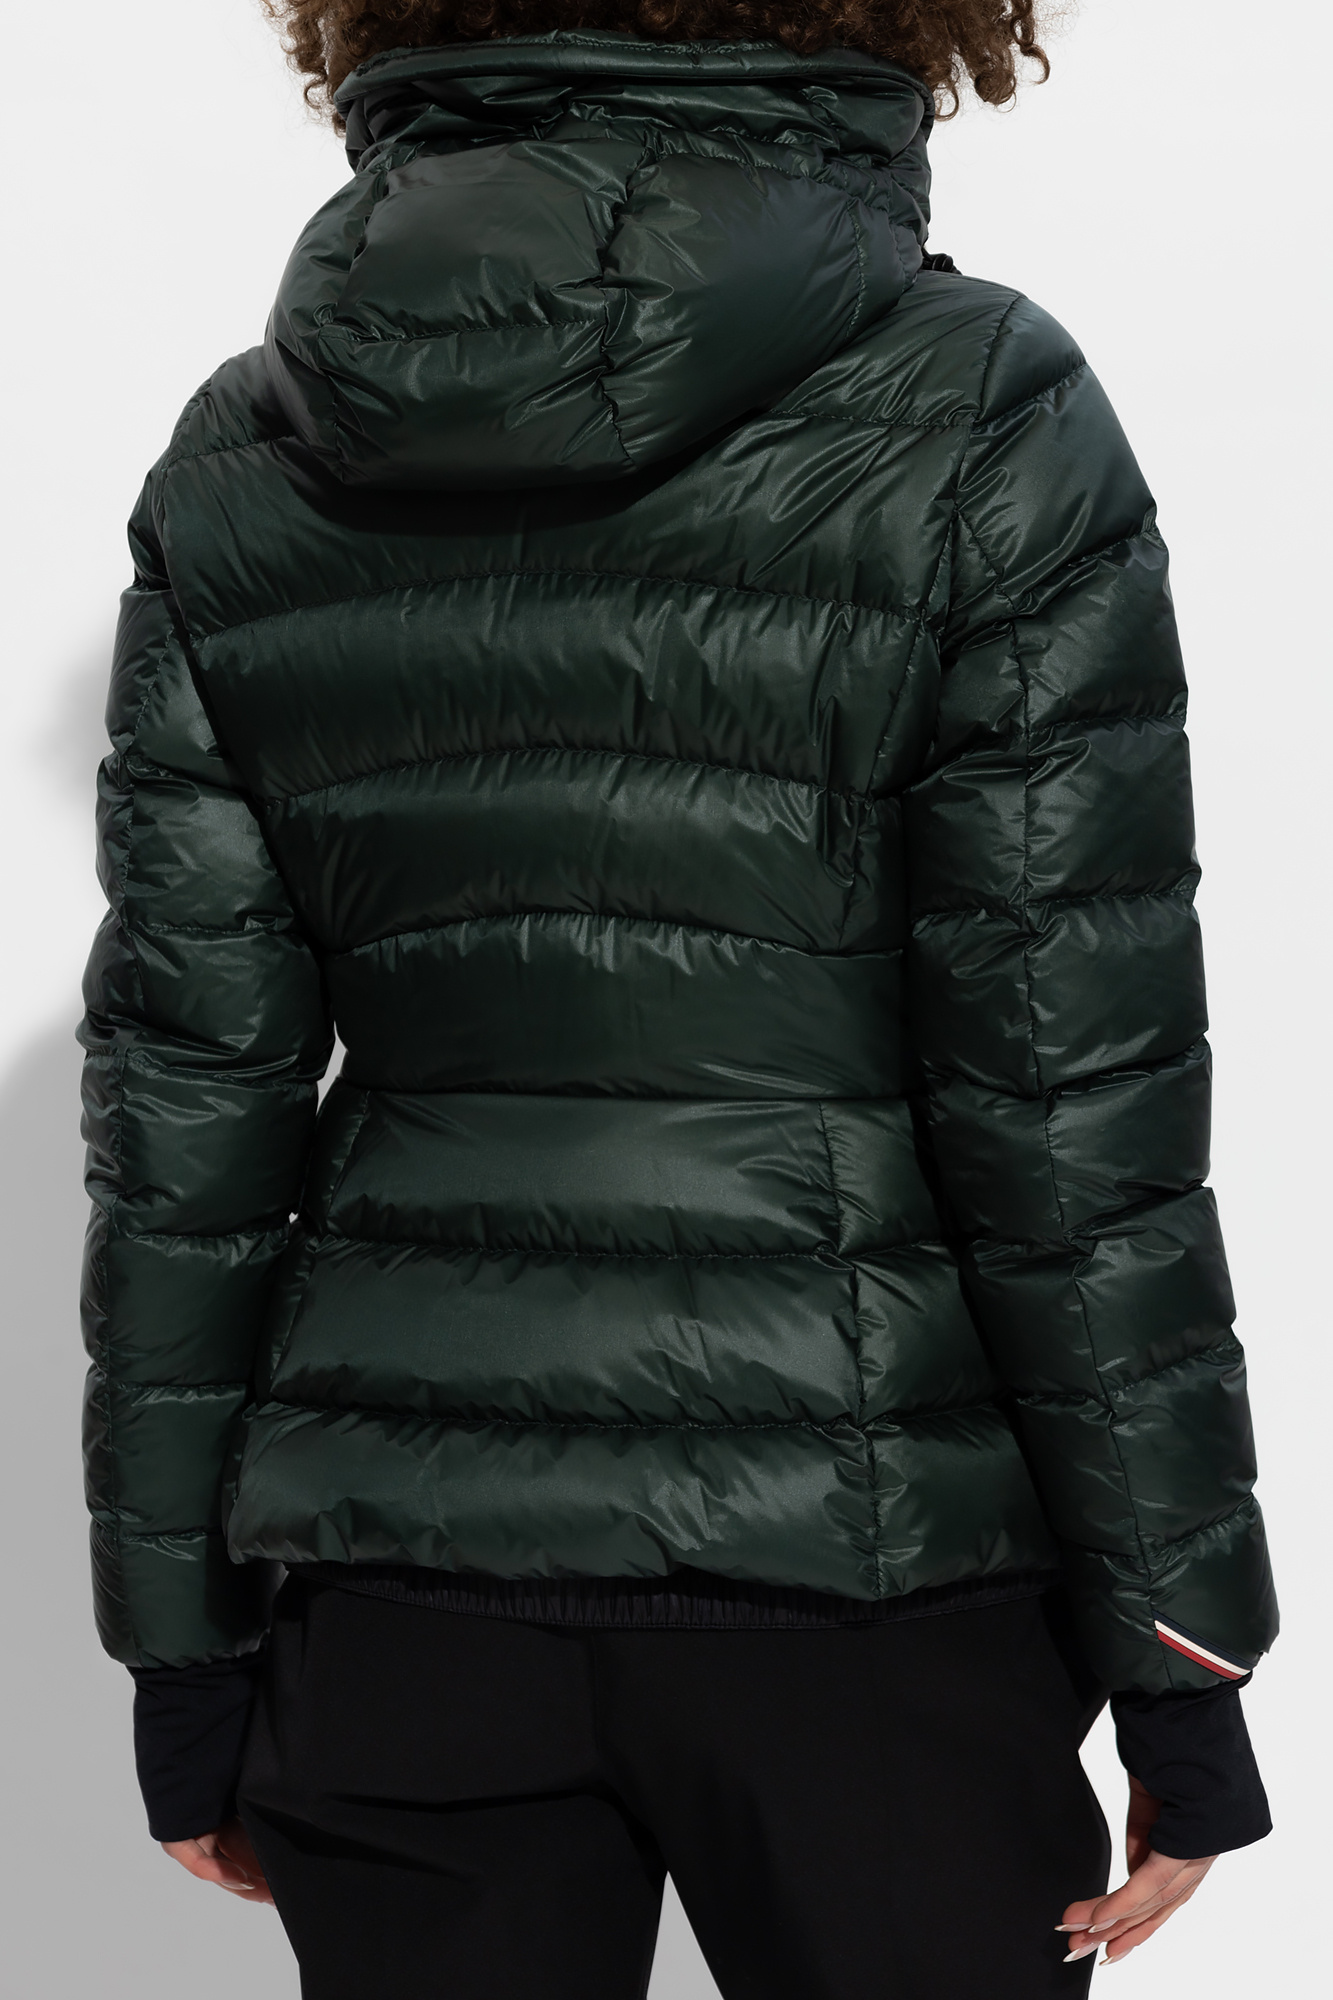 Moncler Grenoble MONCLER PERFORMANCE & STYLE | Women's Clothing